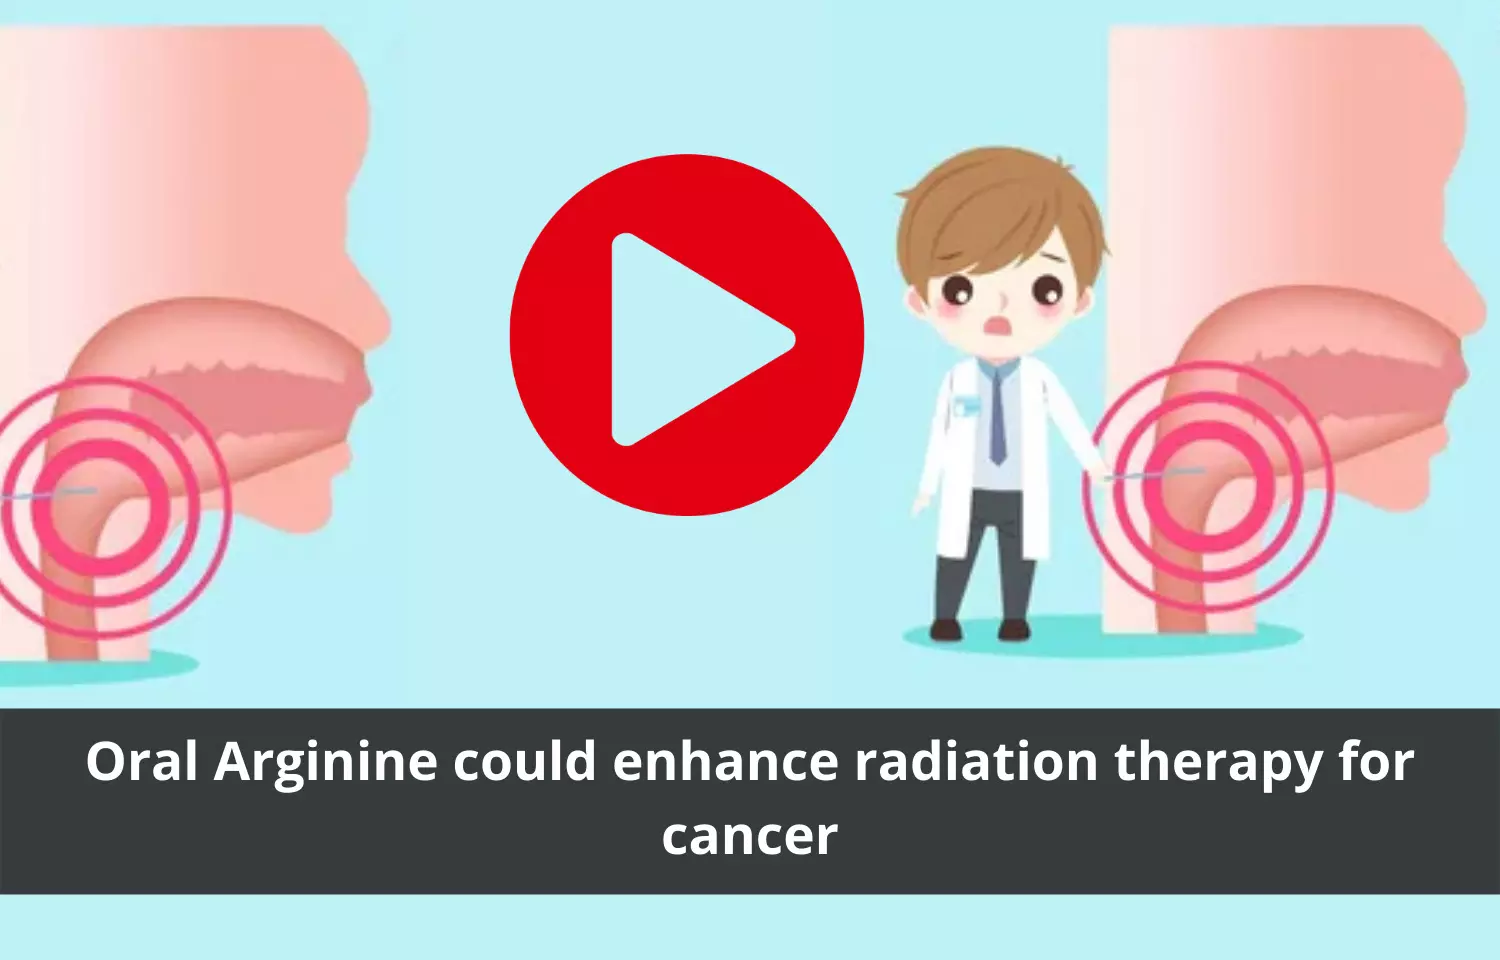 Radiation therapy for cancer patients can be enhanced with oral arginine consumption